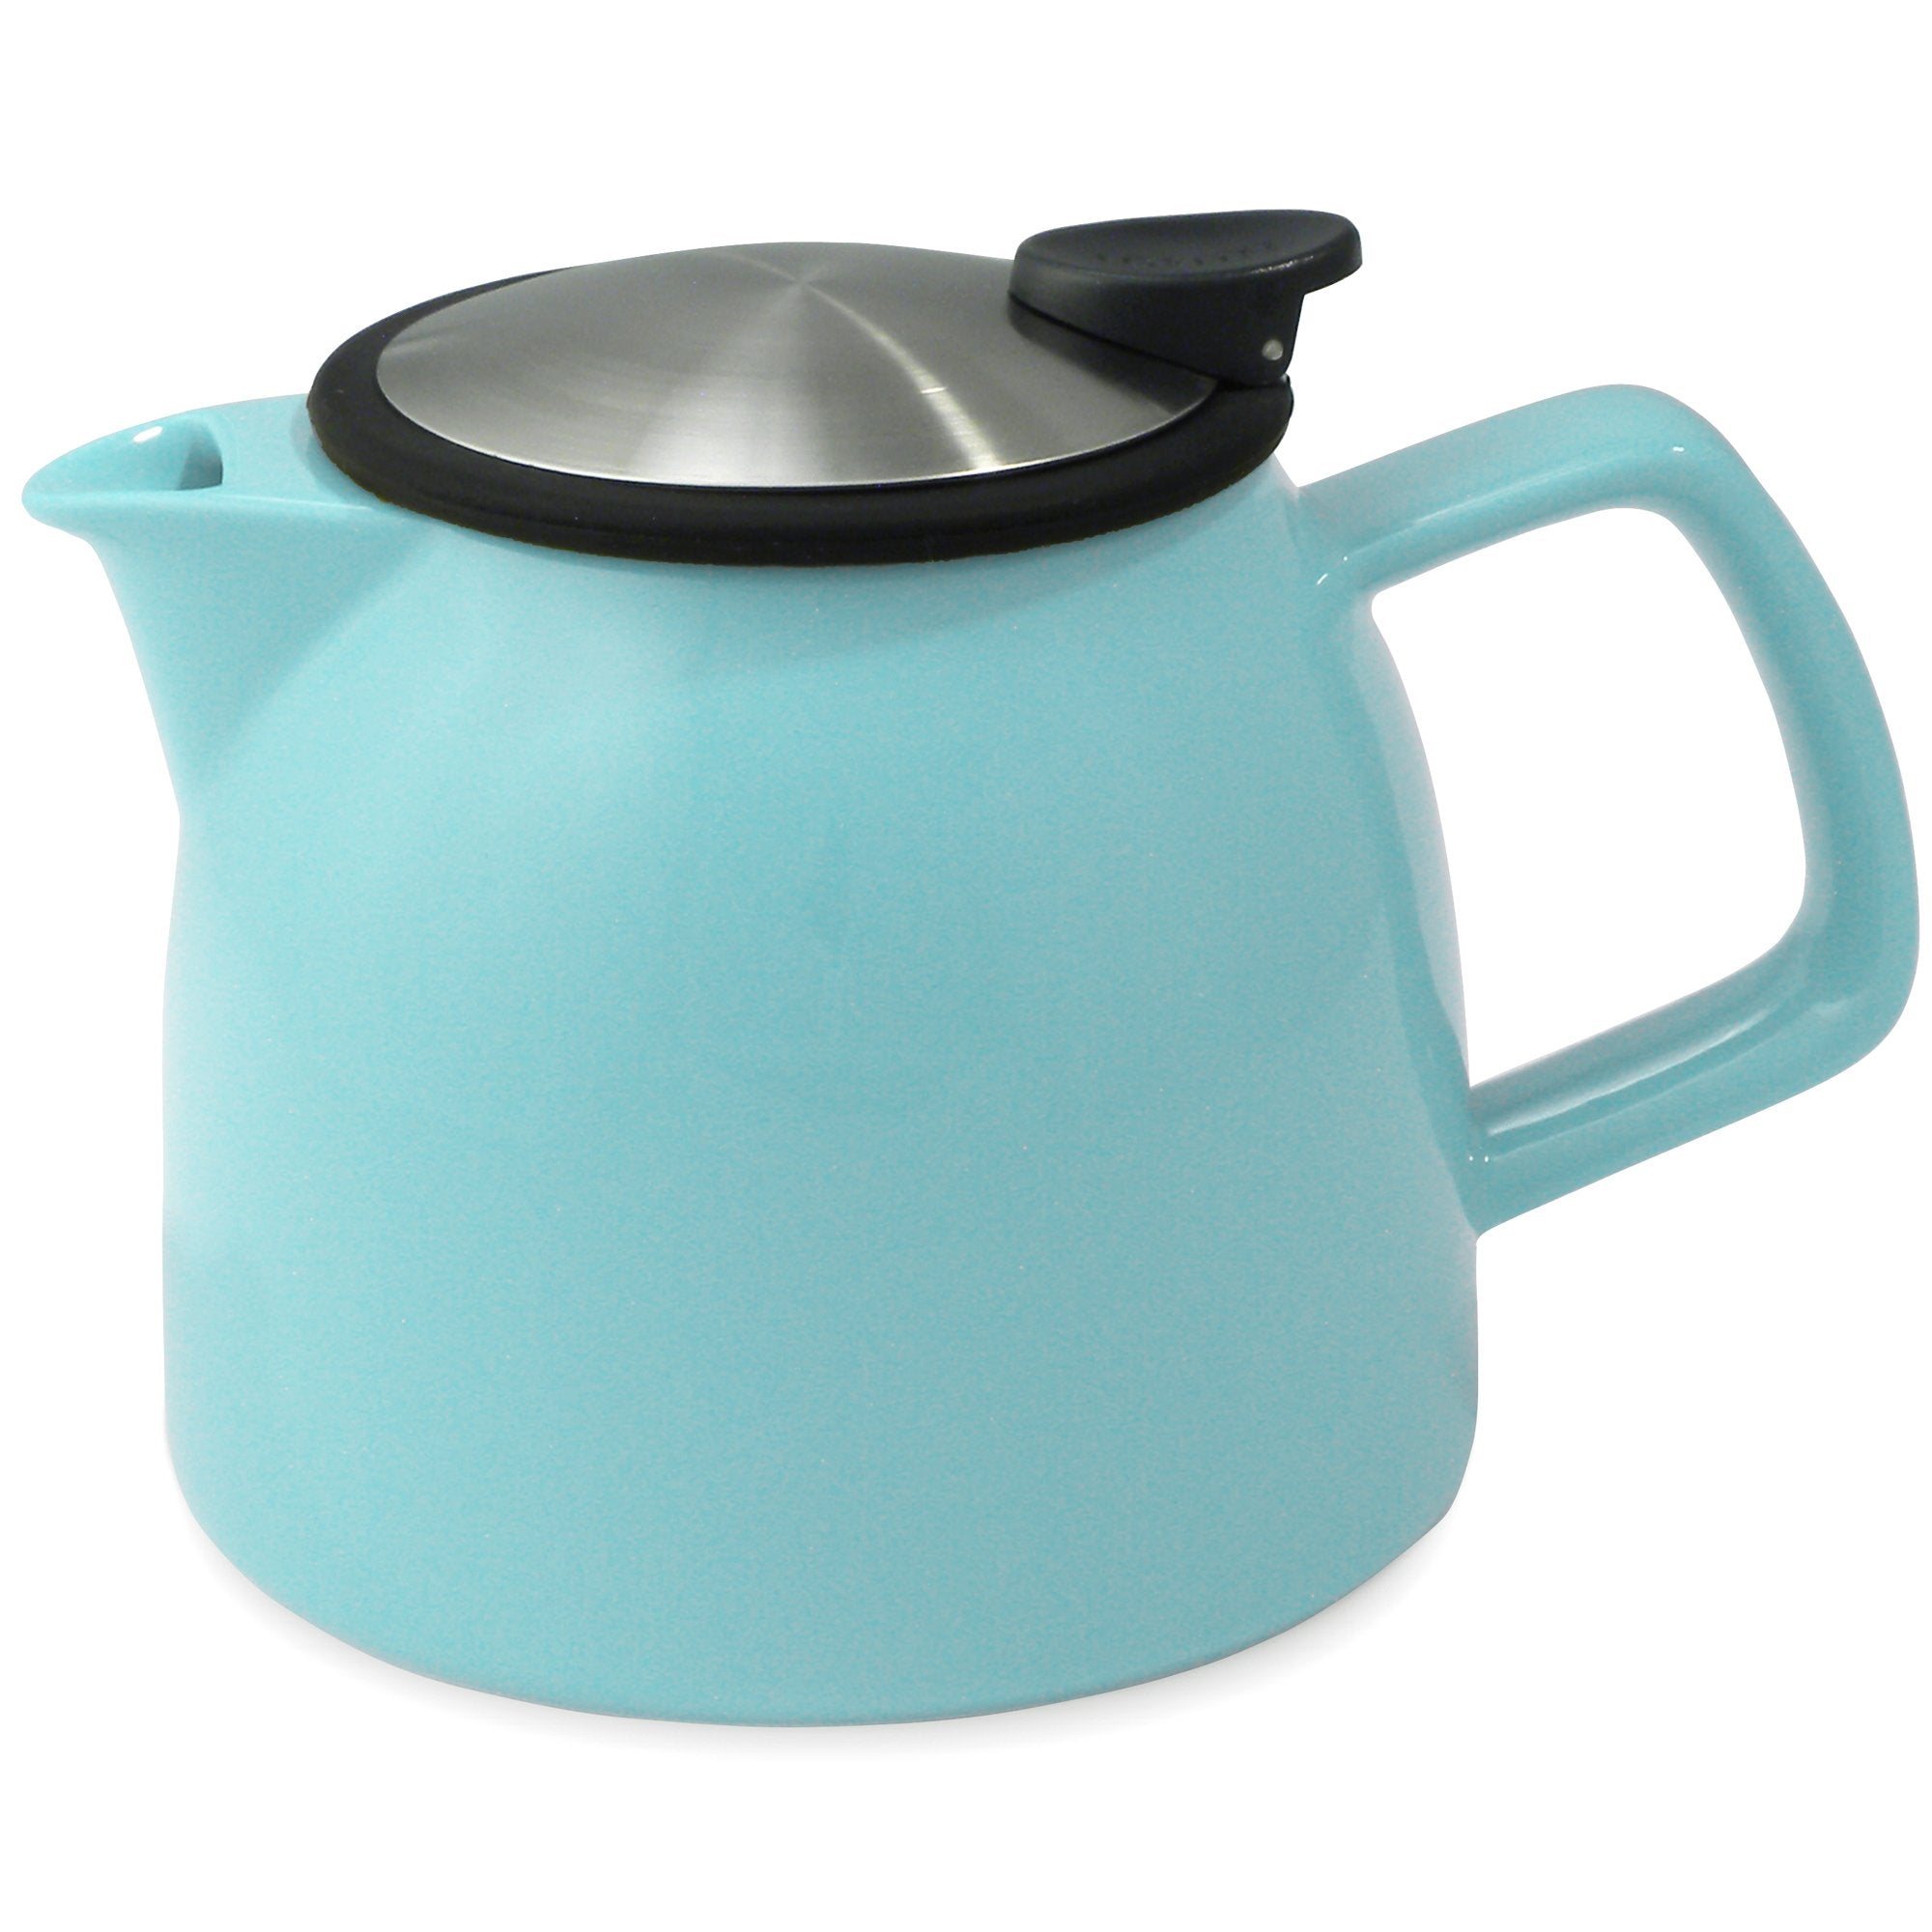 Tealula 26 oz bell-shaped turquoise teapot with square handle and black and silver detachable push-on-lid